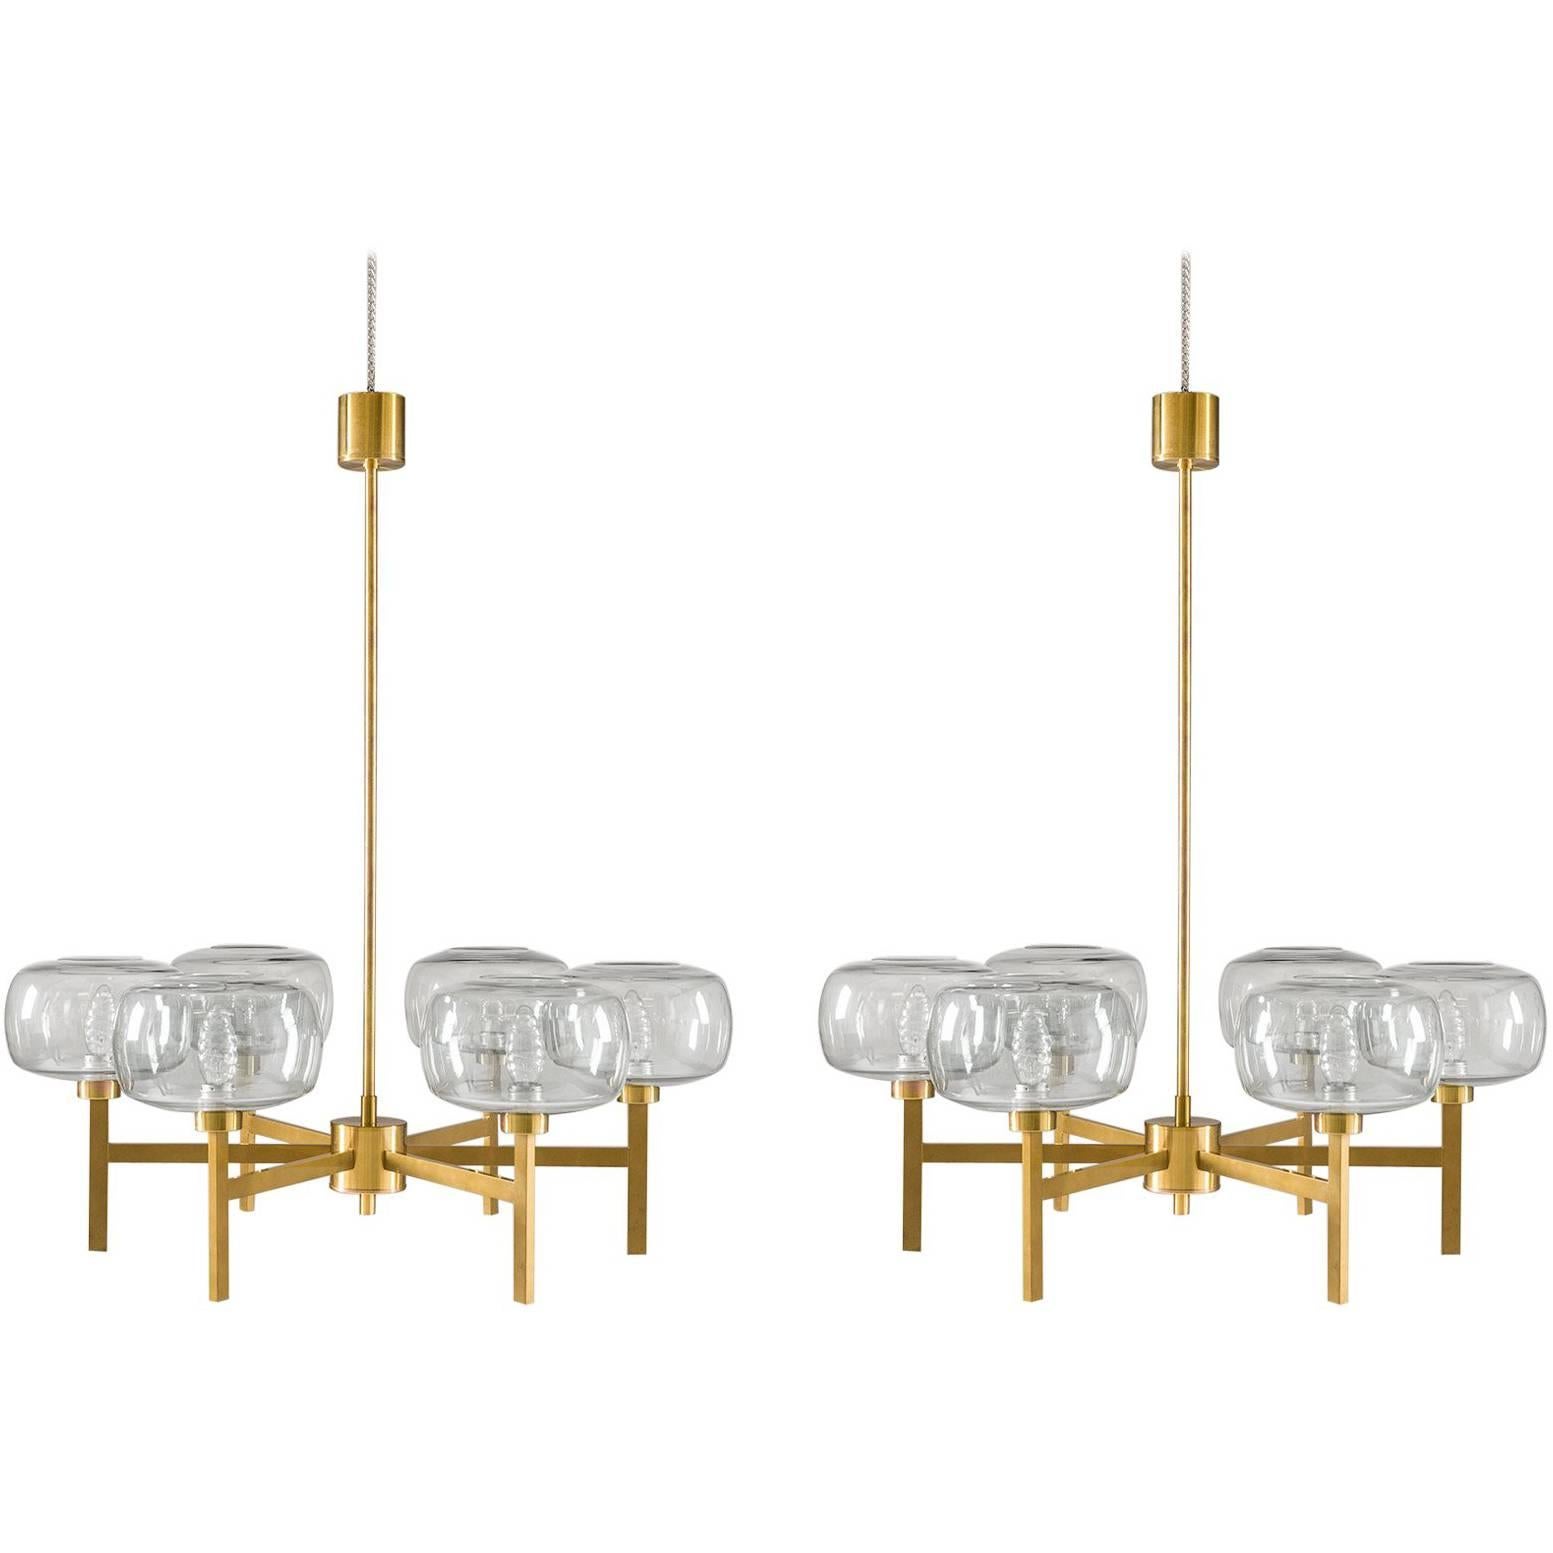 Large Swedish Chandelier in Brass and Glass by Holger Johansson